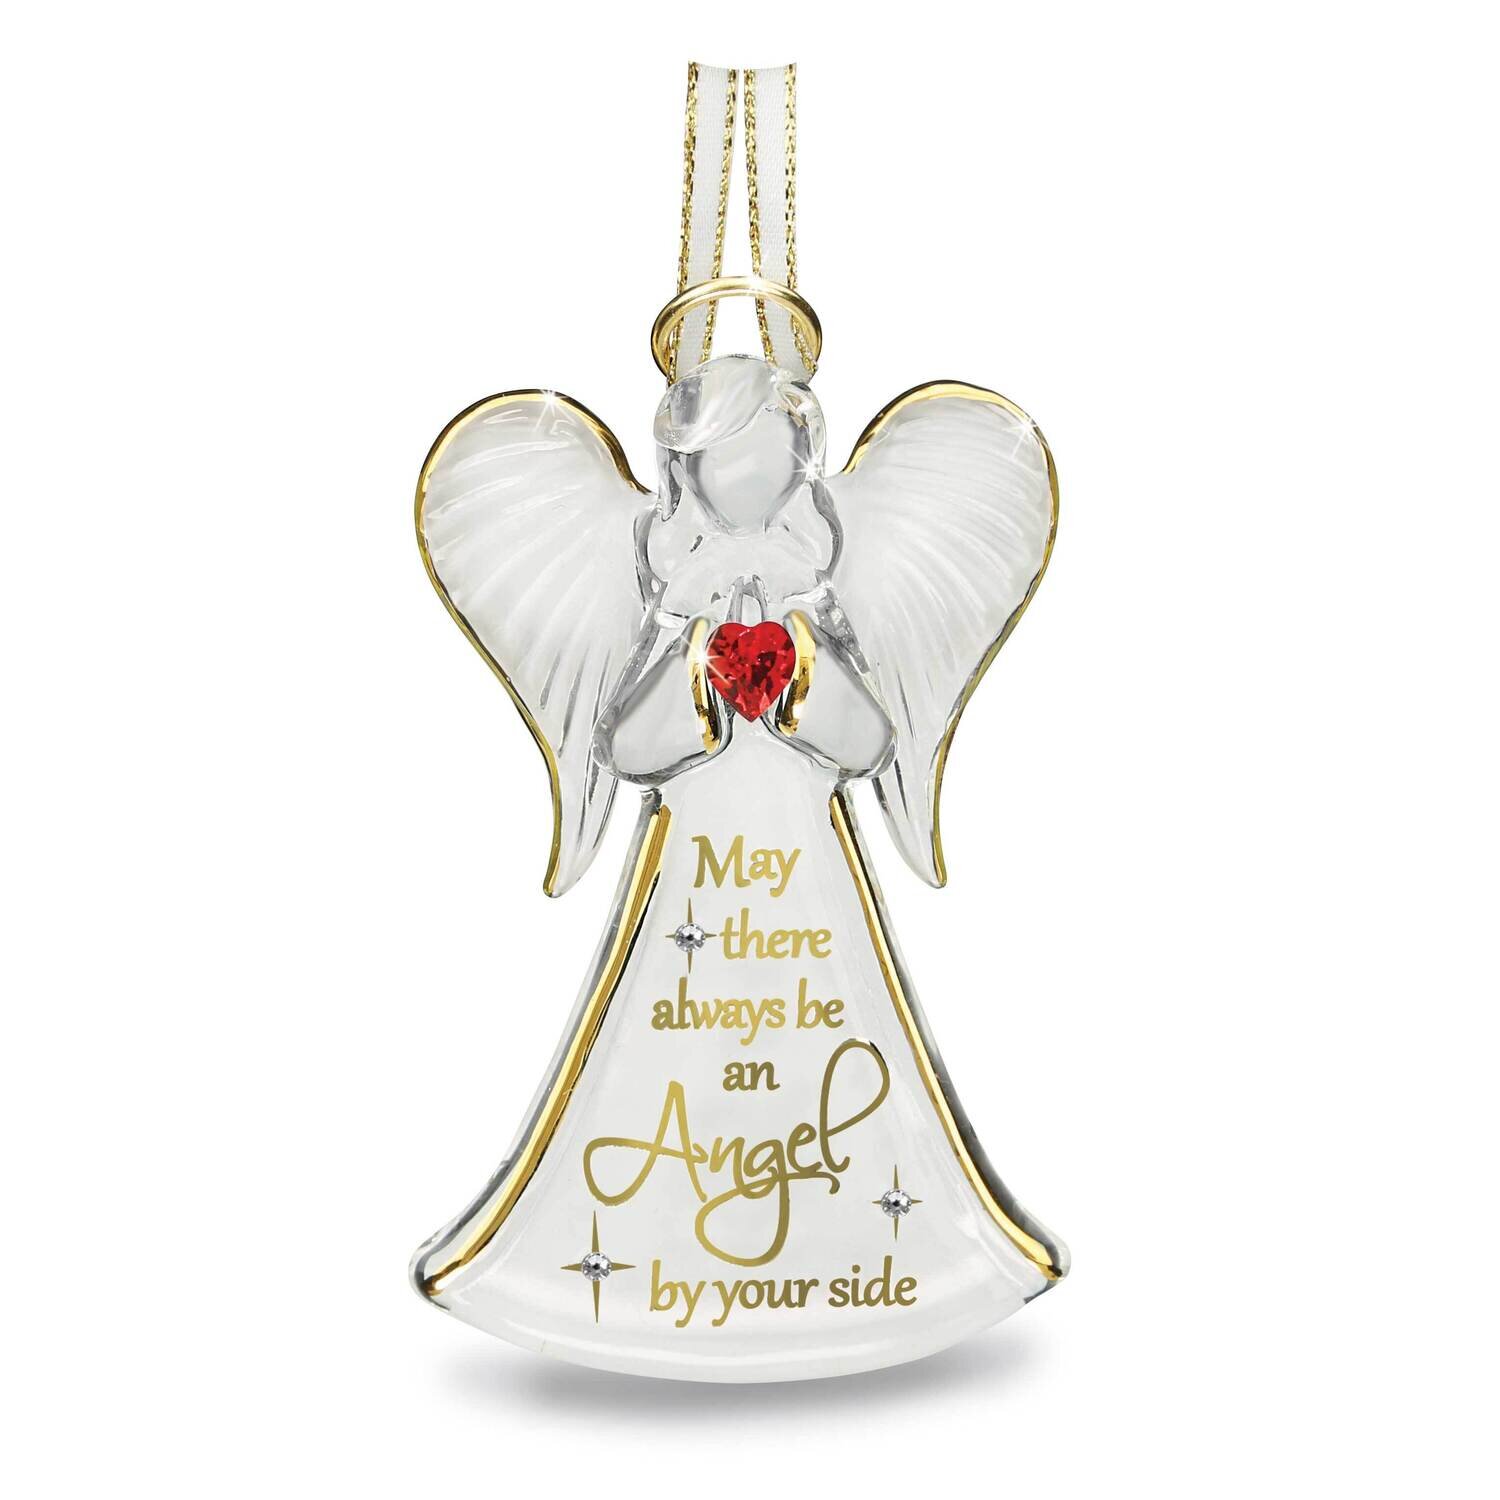 By Your Side Angel Glass Figurine Ornament GM21630